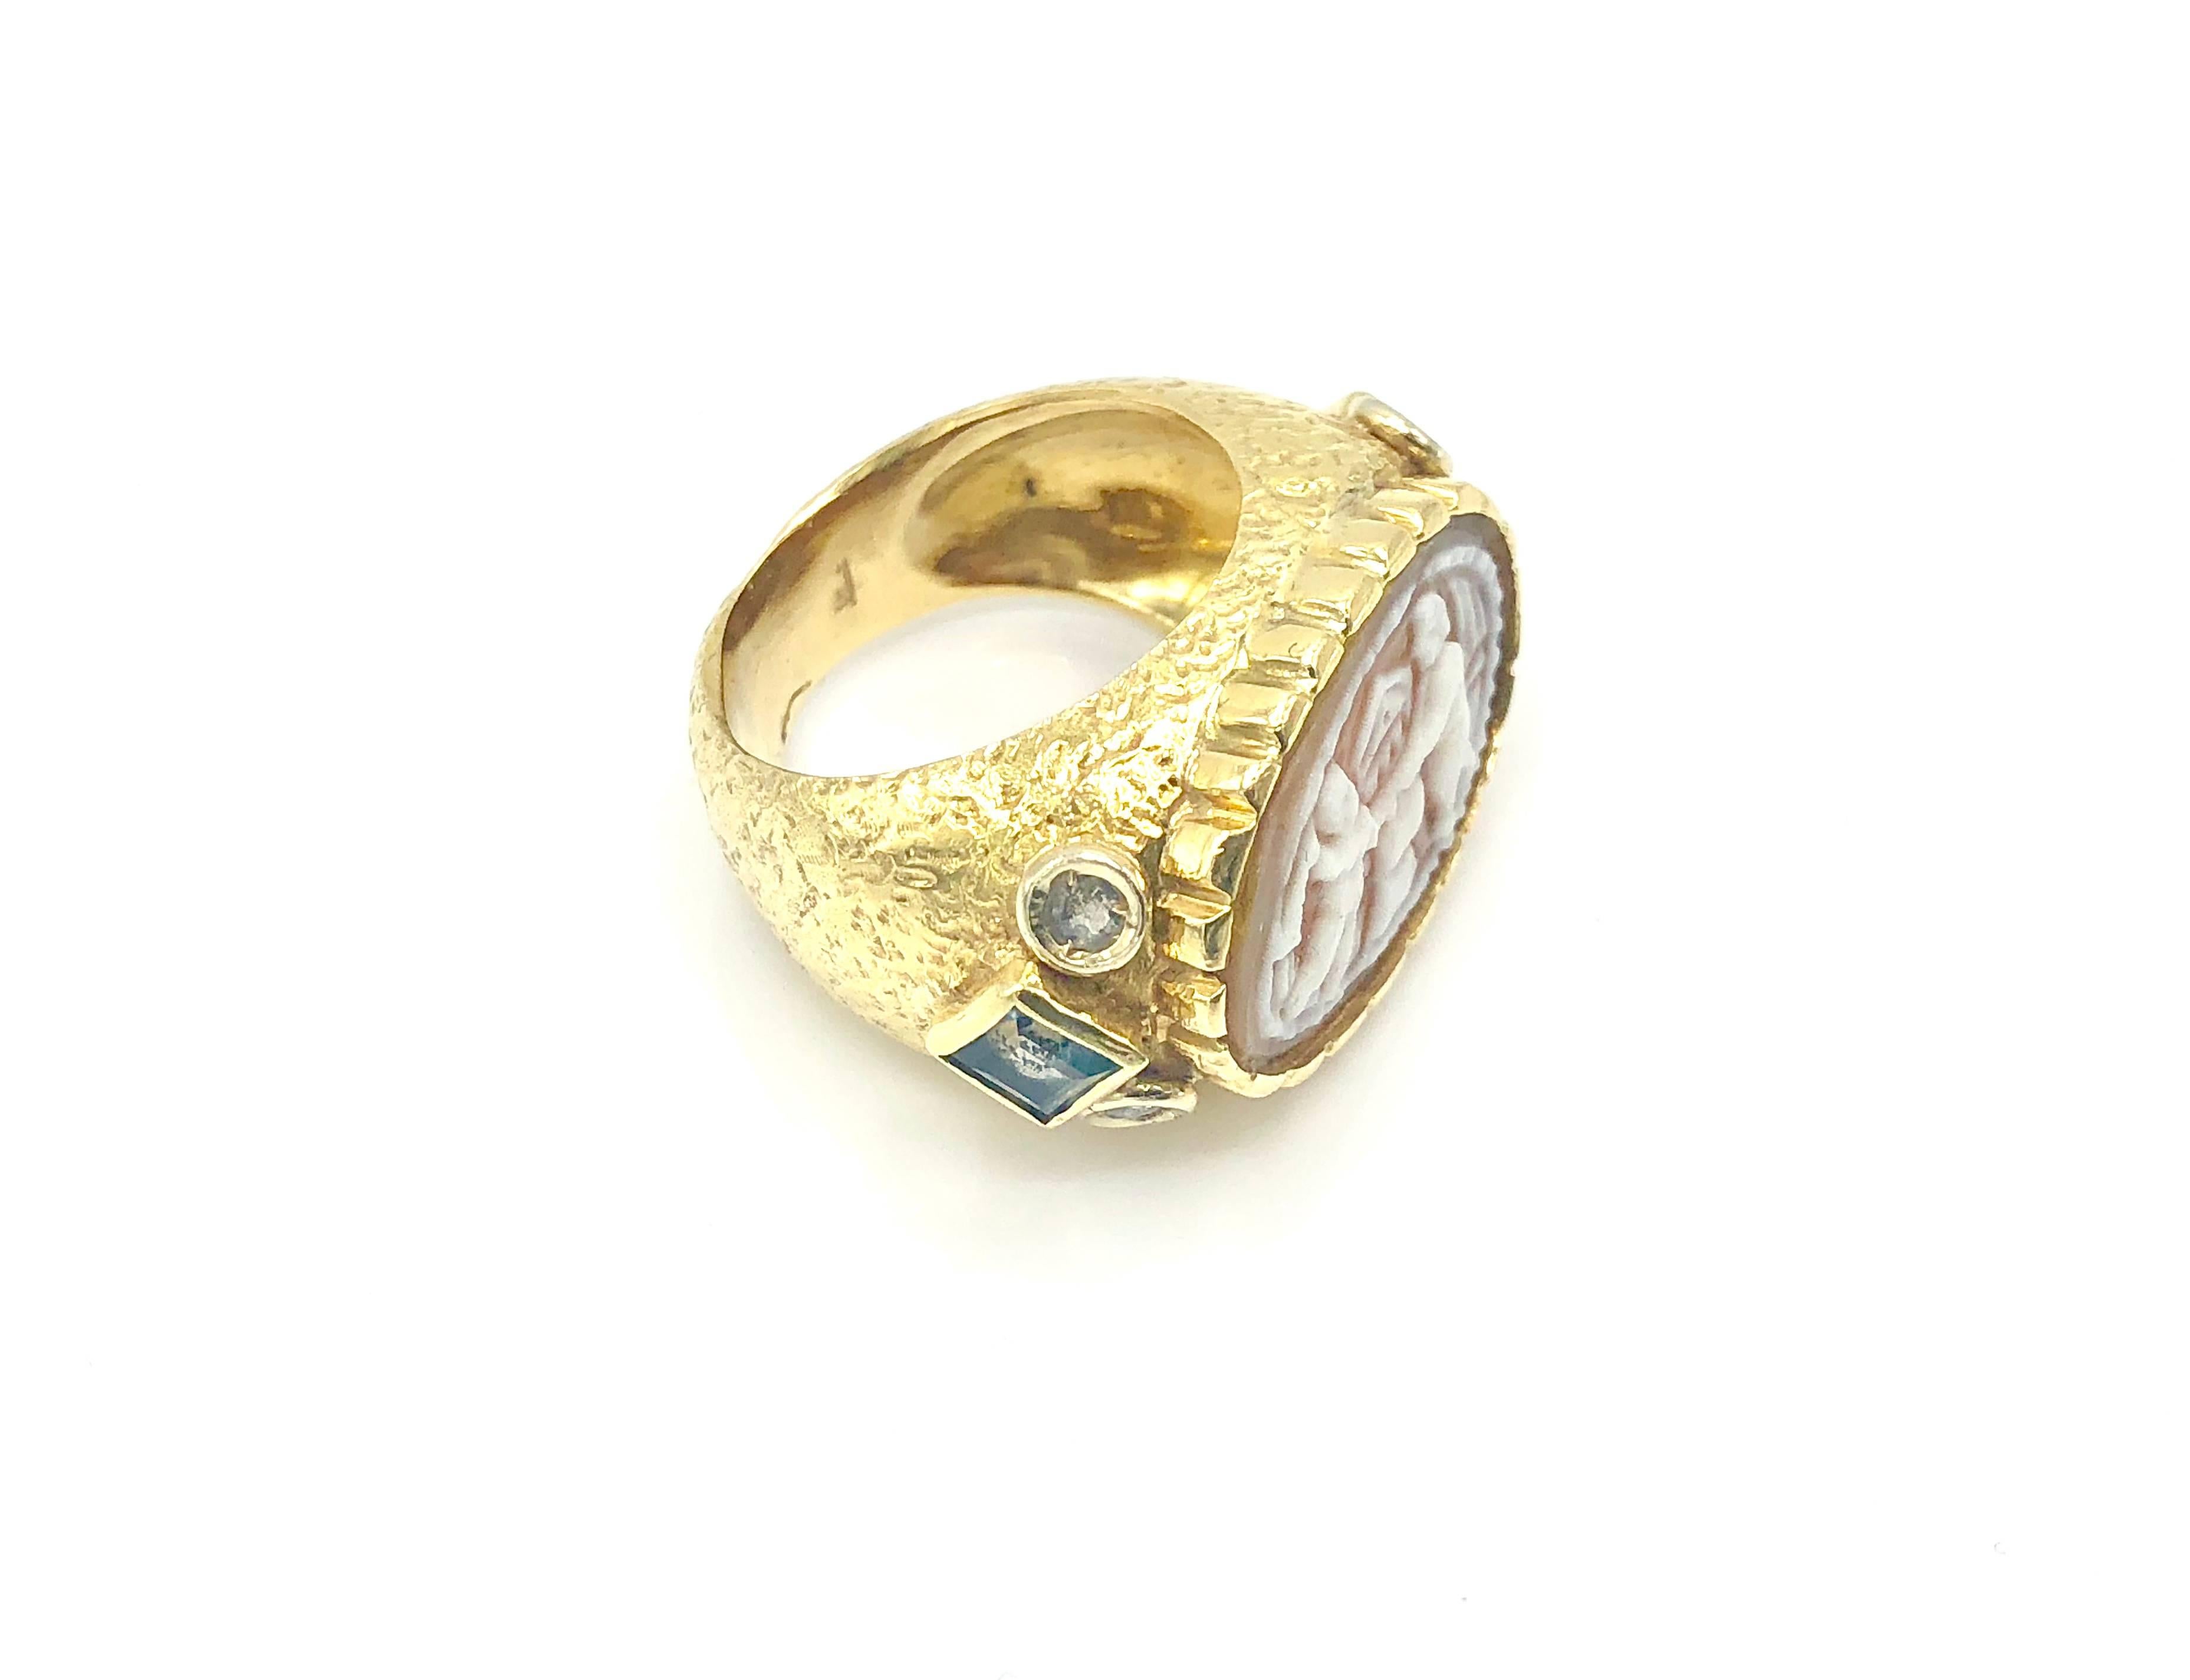 Cammeo Gold Ring

Size
IT: 10,5 
US: 5 1/2